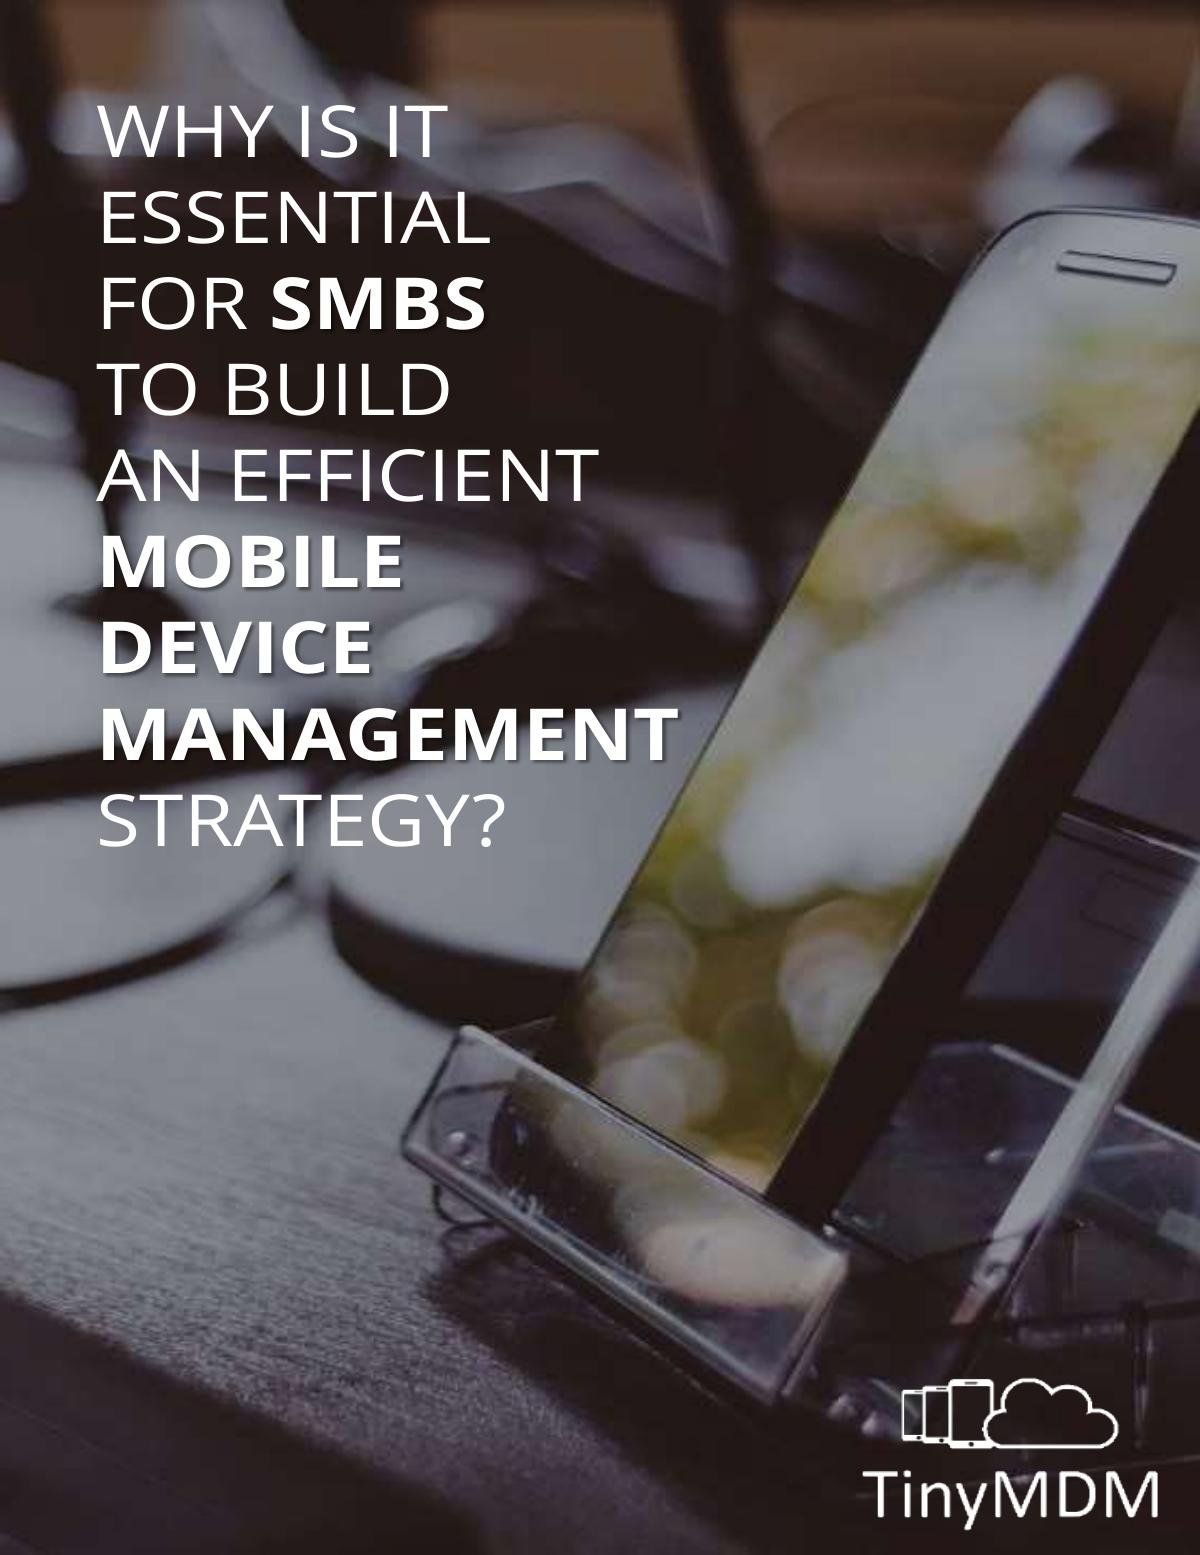 WHY IS IT ESSENTIAL FOR SMBs TO BUILD AN EFFICIENT MOBILE DEVICE MANAGEMENT STRATEGY?